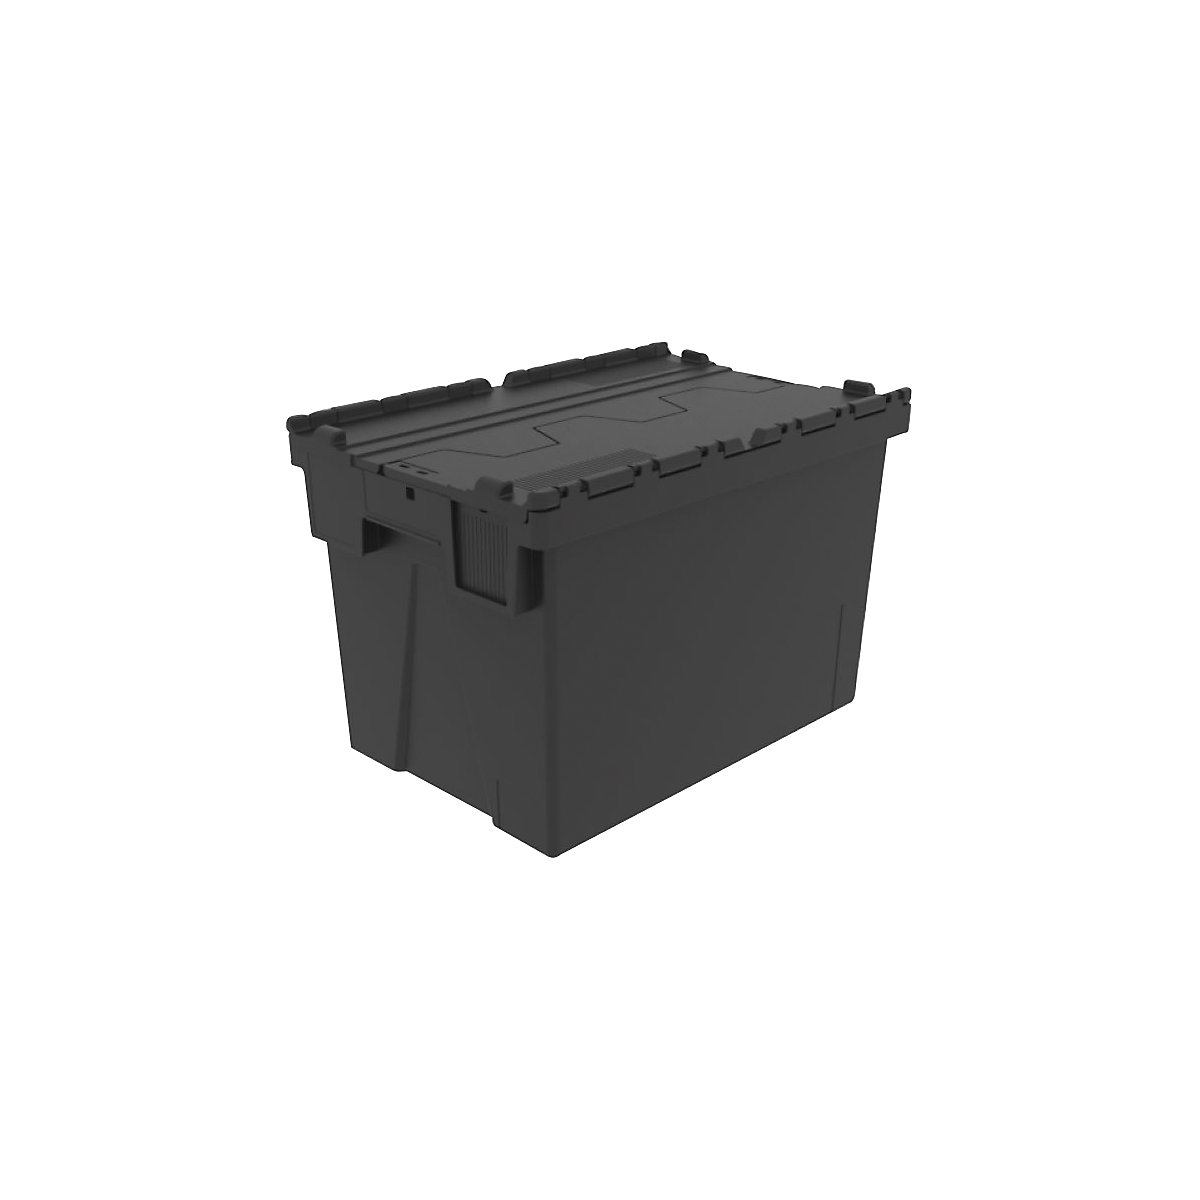 Reusable stacking container, LxWxH 600 x 400 x 400 mm, black-5